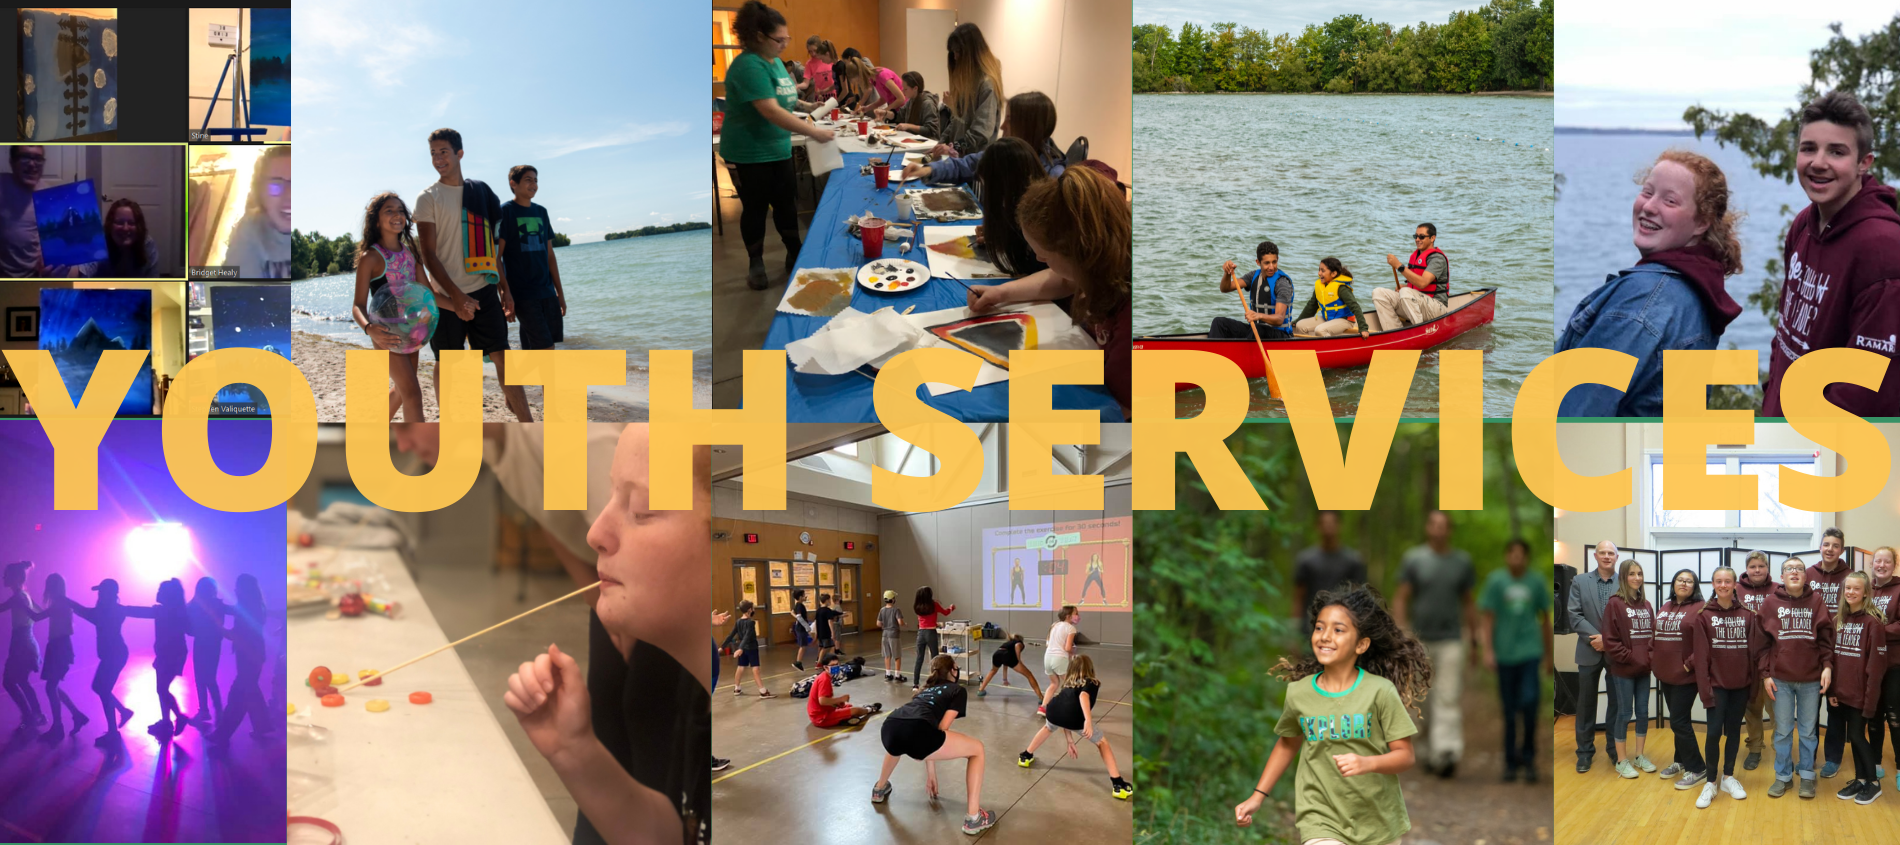 collages of programs with the caption "Youth Services"